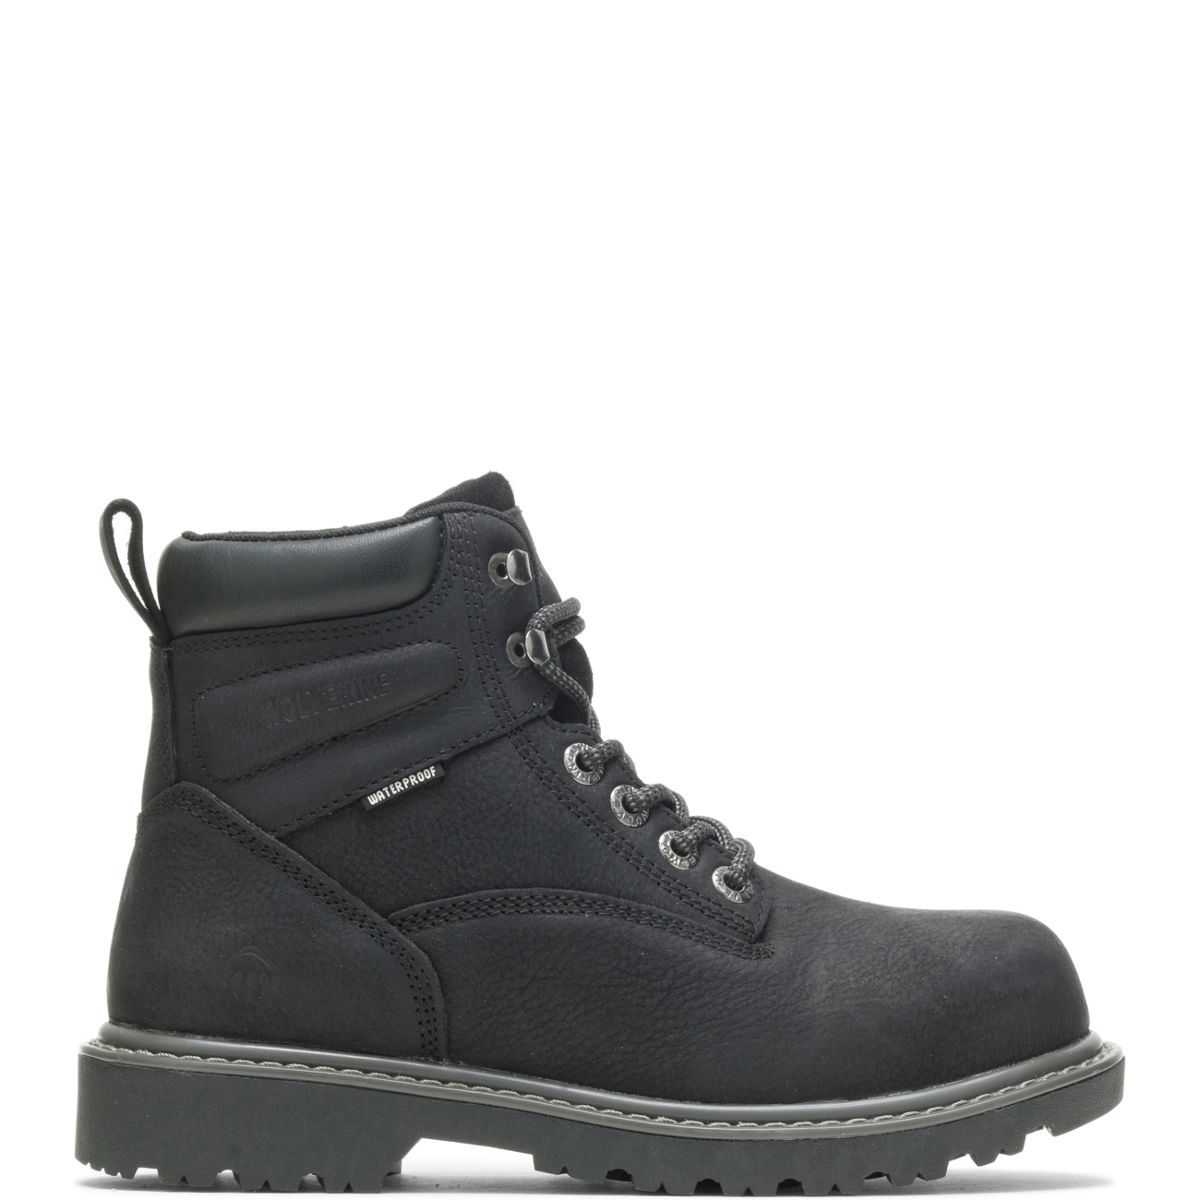 black work boots for women